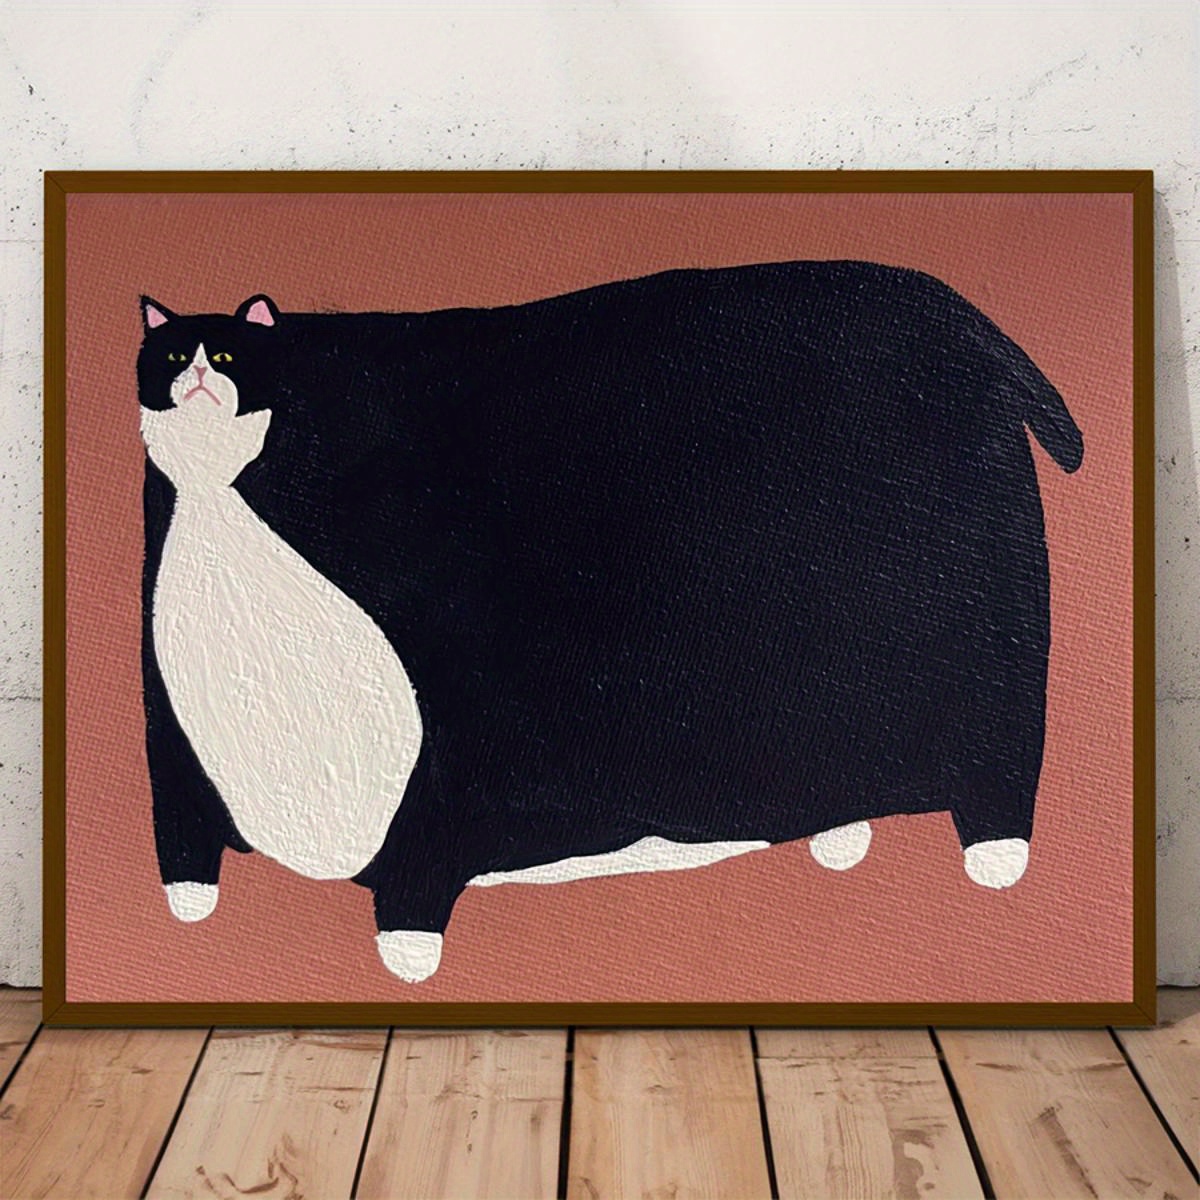 

1pc Unframed Canvas Poster, American Cat Poster, Funny Fat Cat Poster Wall Art For Living Room, Wall Decor For Bedroom, Home Decor Room Decor